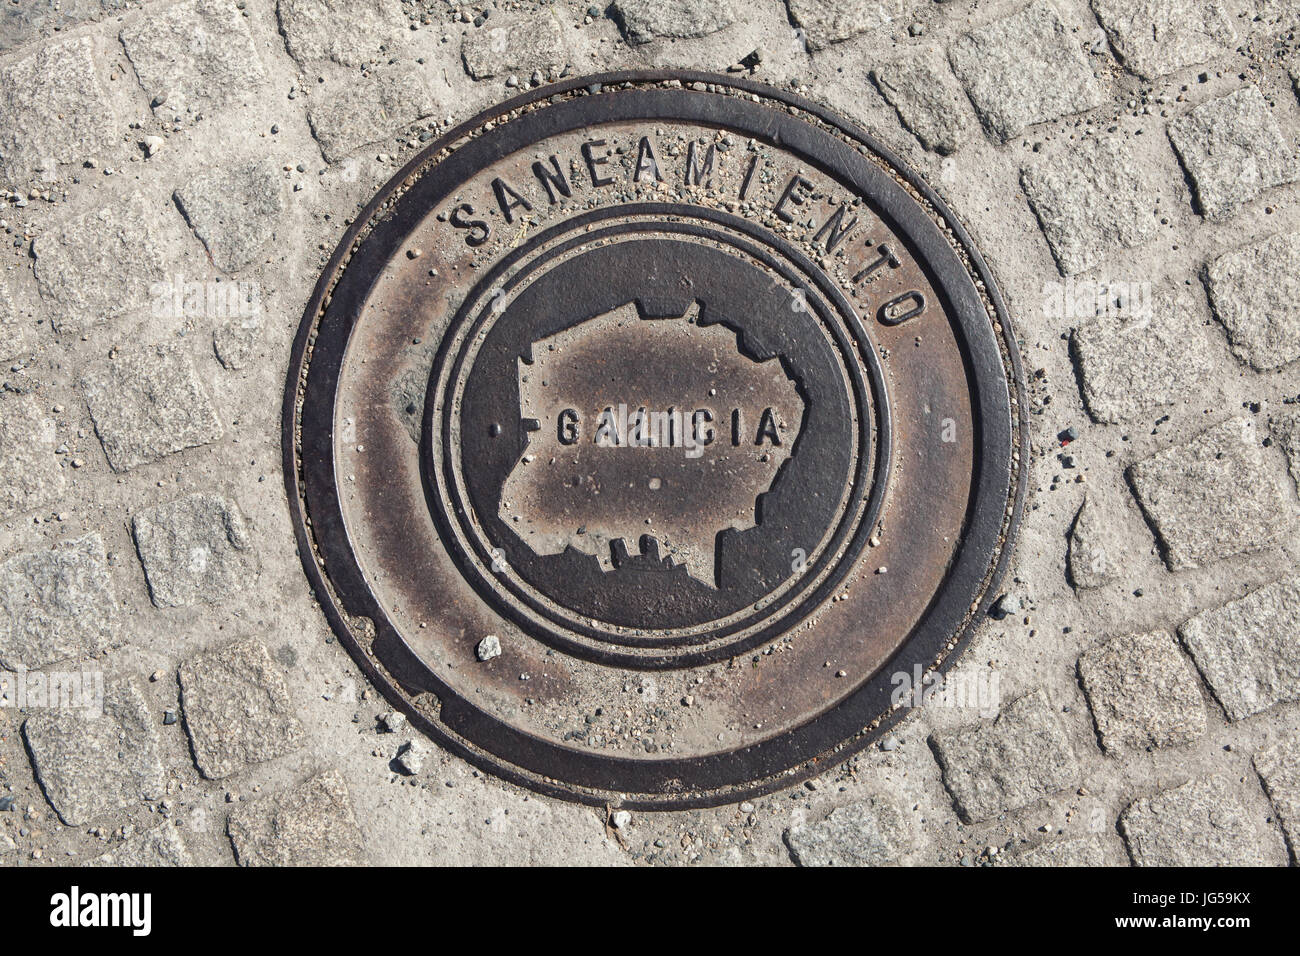 Map of Galicia depicted on the manhole cover in Santiago de Compostela, Galicia, Spain. Stock Photo